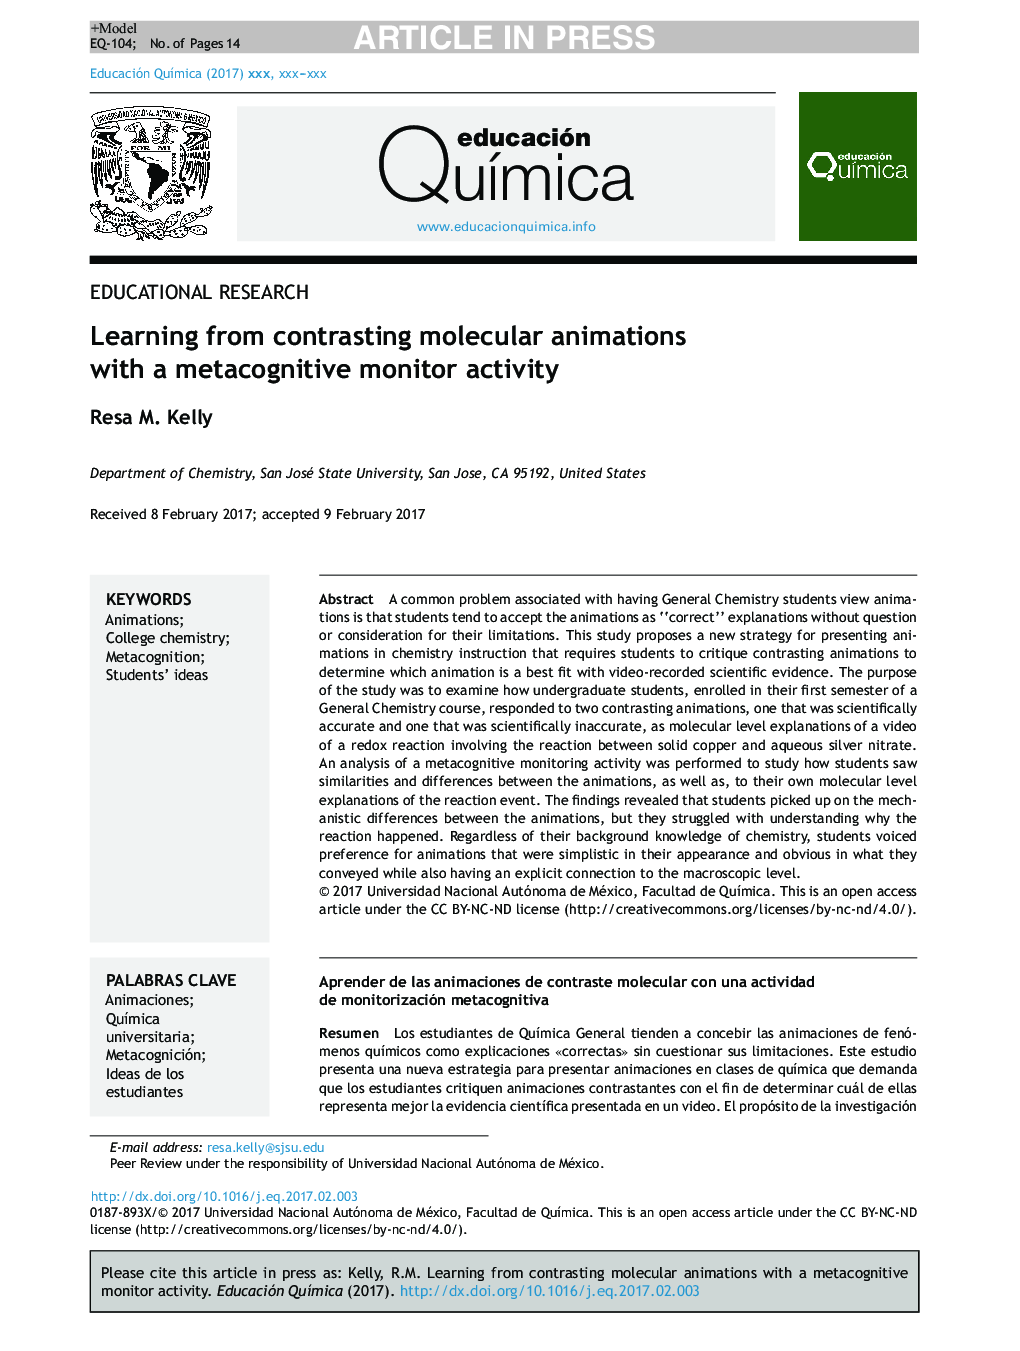 Learning from contrasting molecular animations with a metacognitive monitor activity